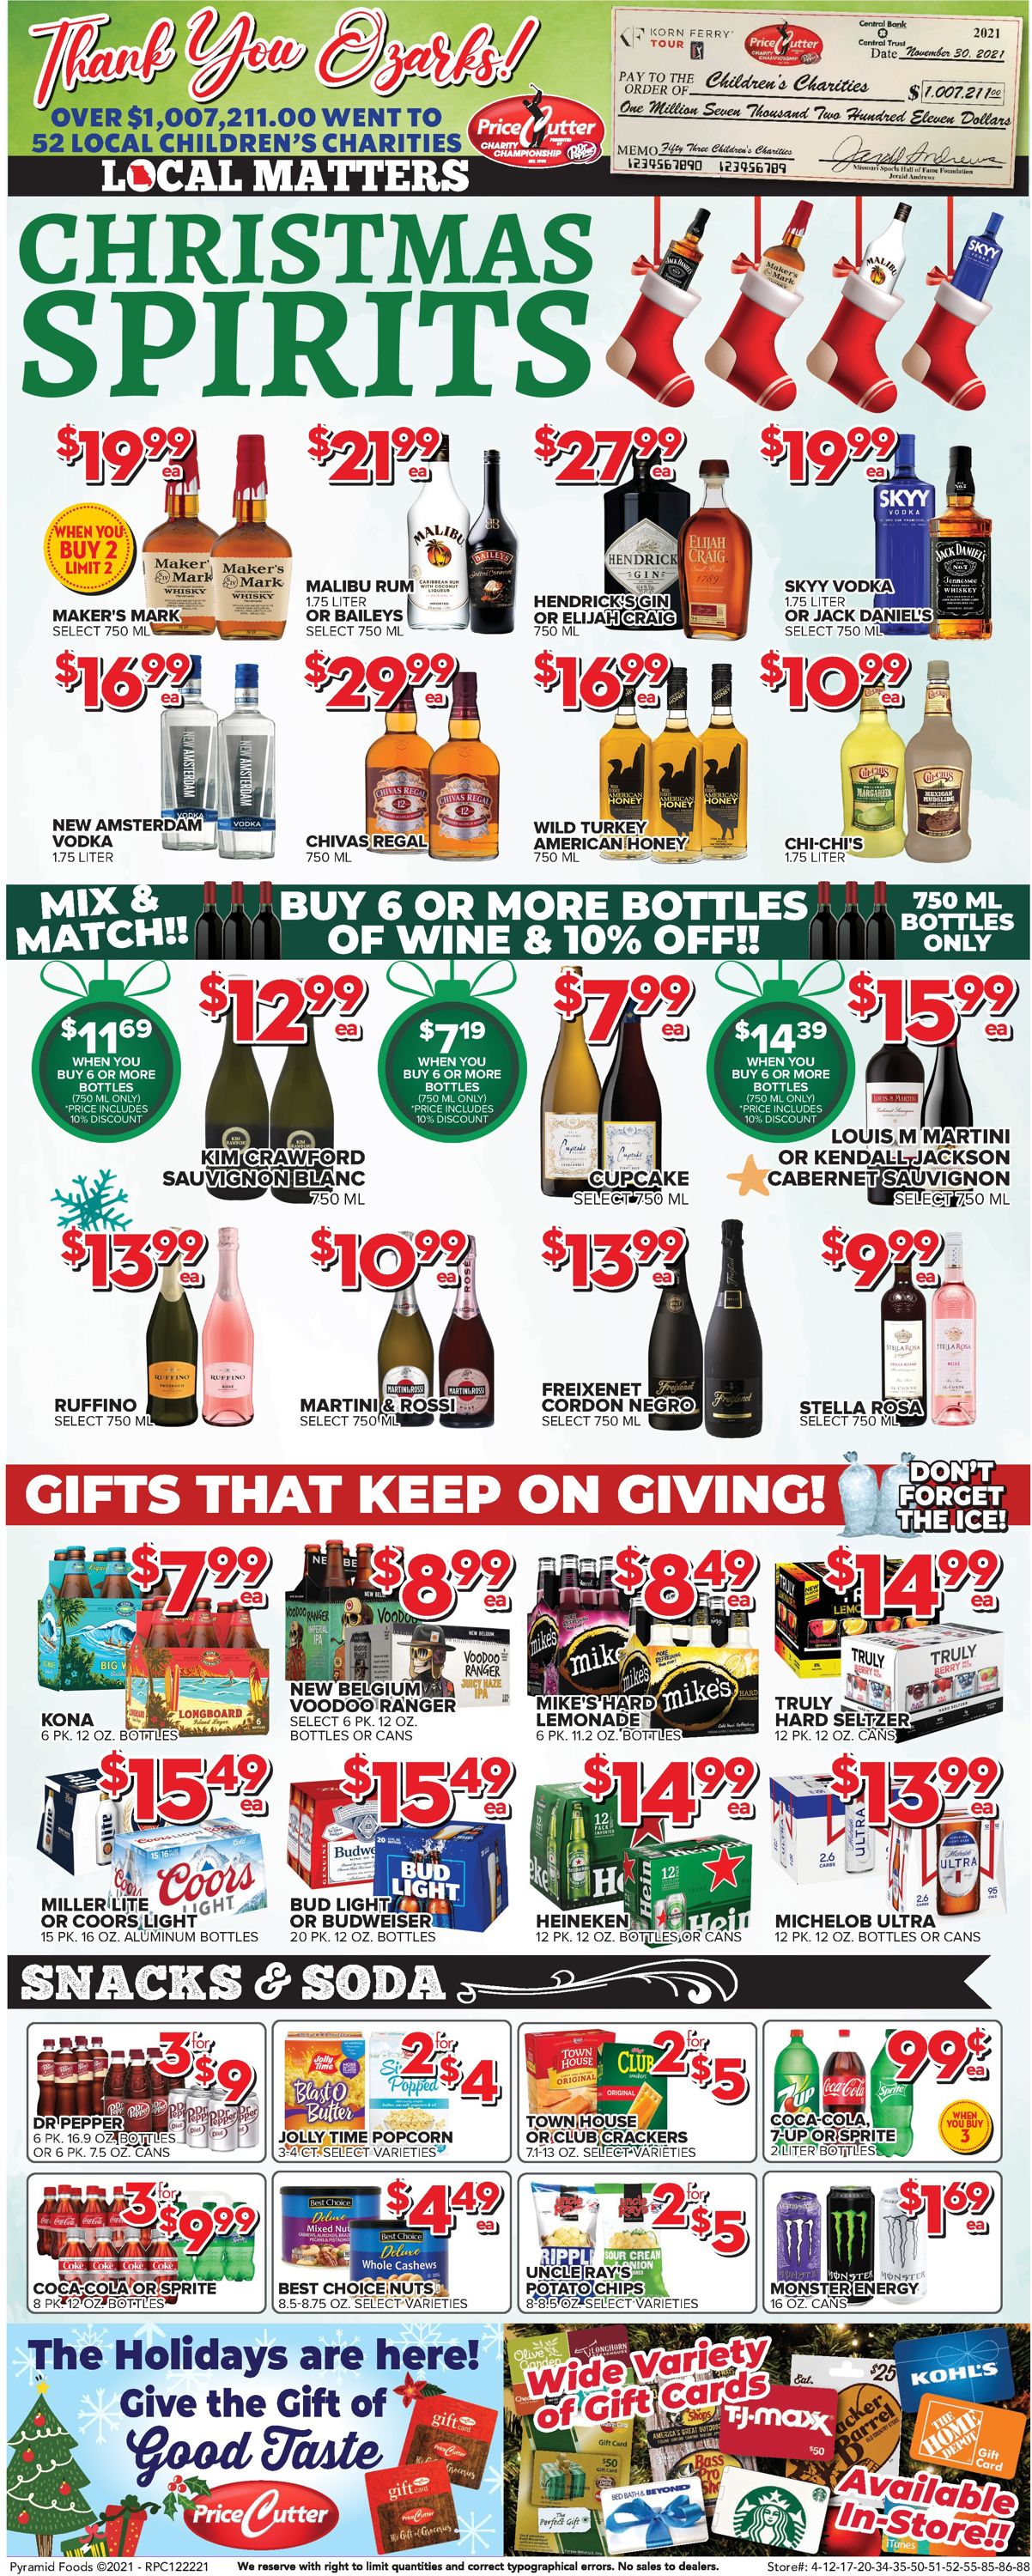 Price Cutter CHRISTMAS 2021 Weekly Ad Circular - valid 12/22-12/28/2021 (Page 4)